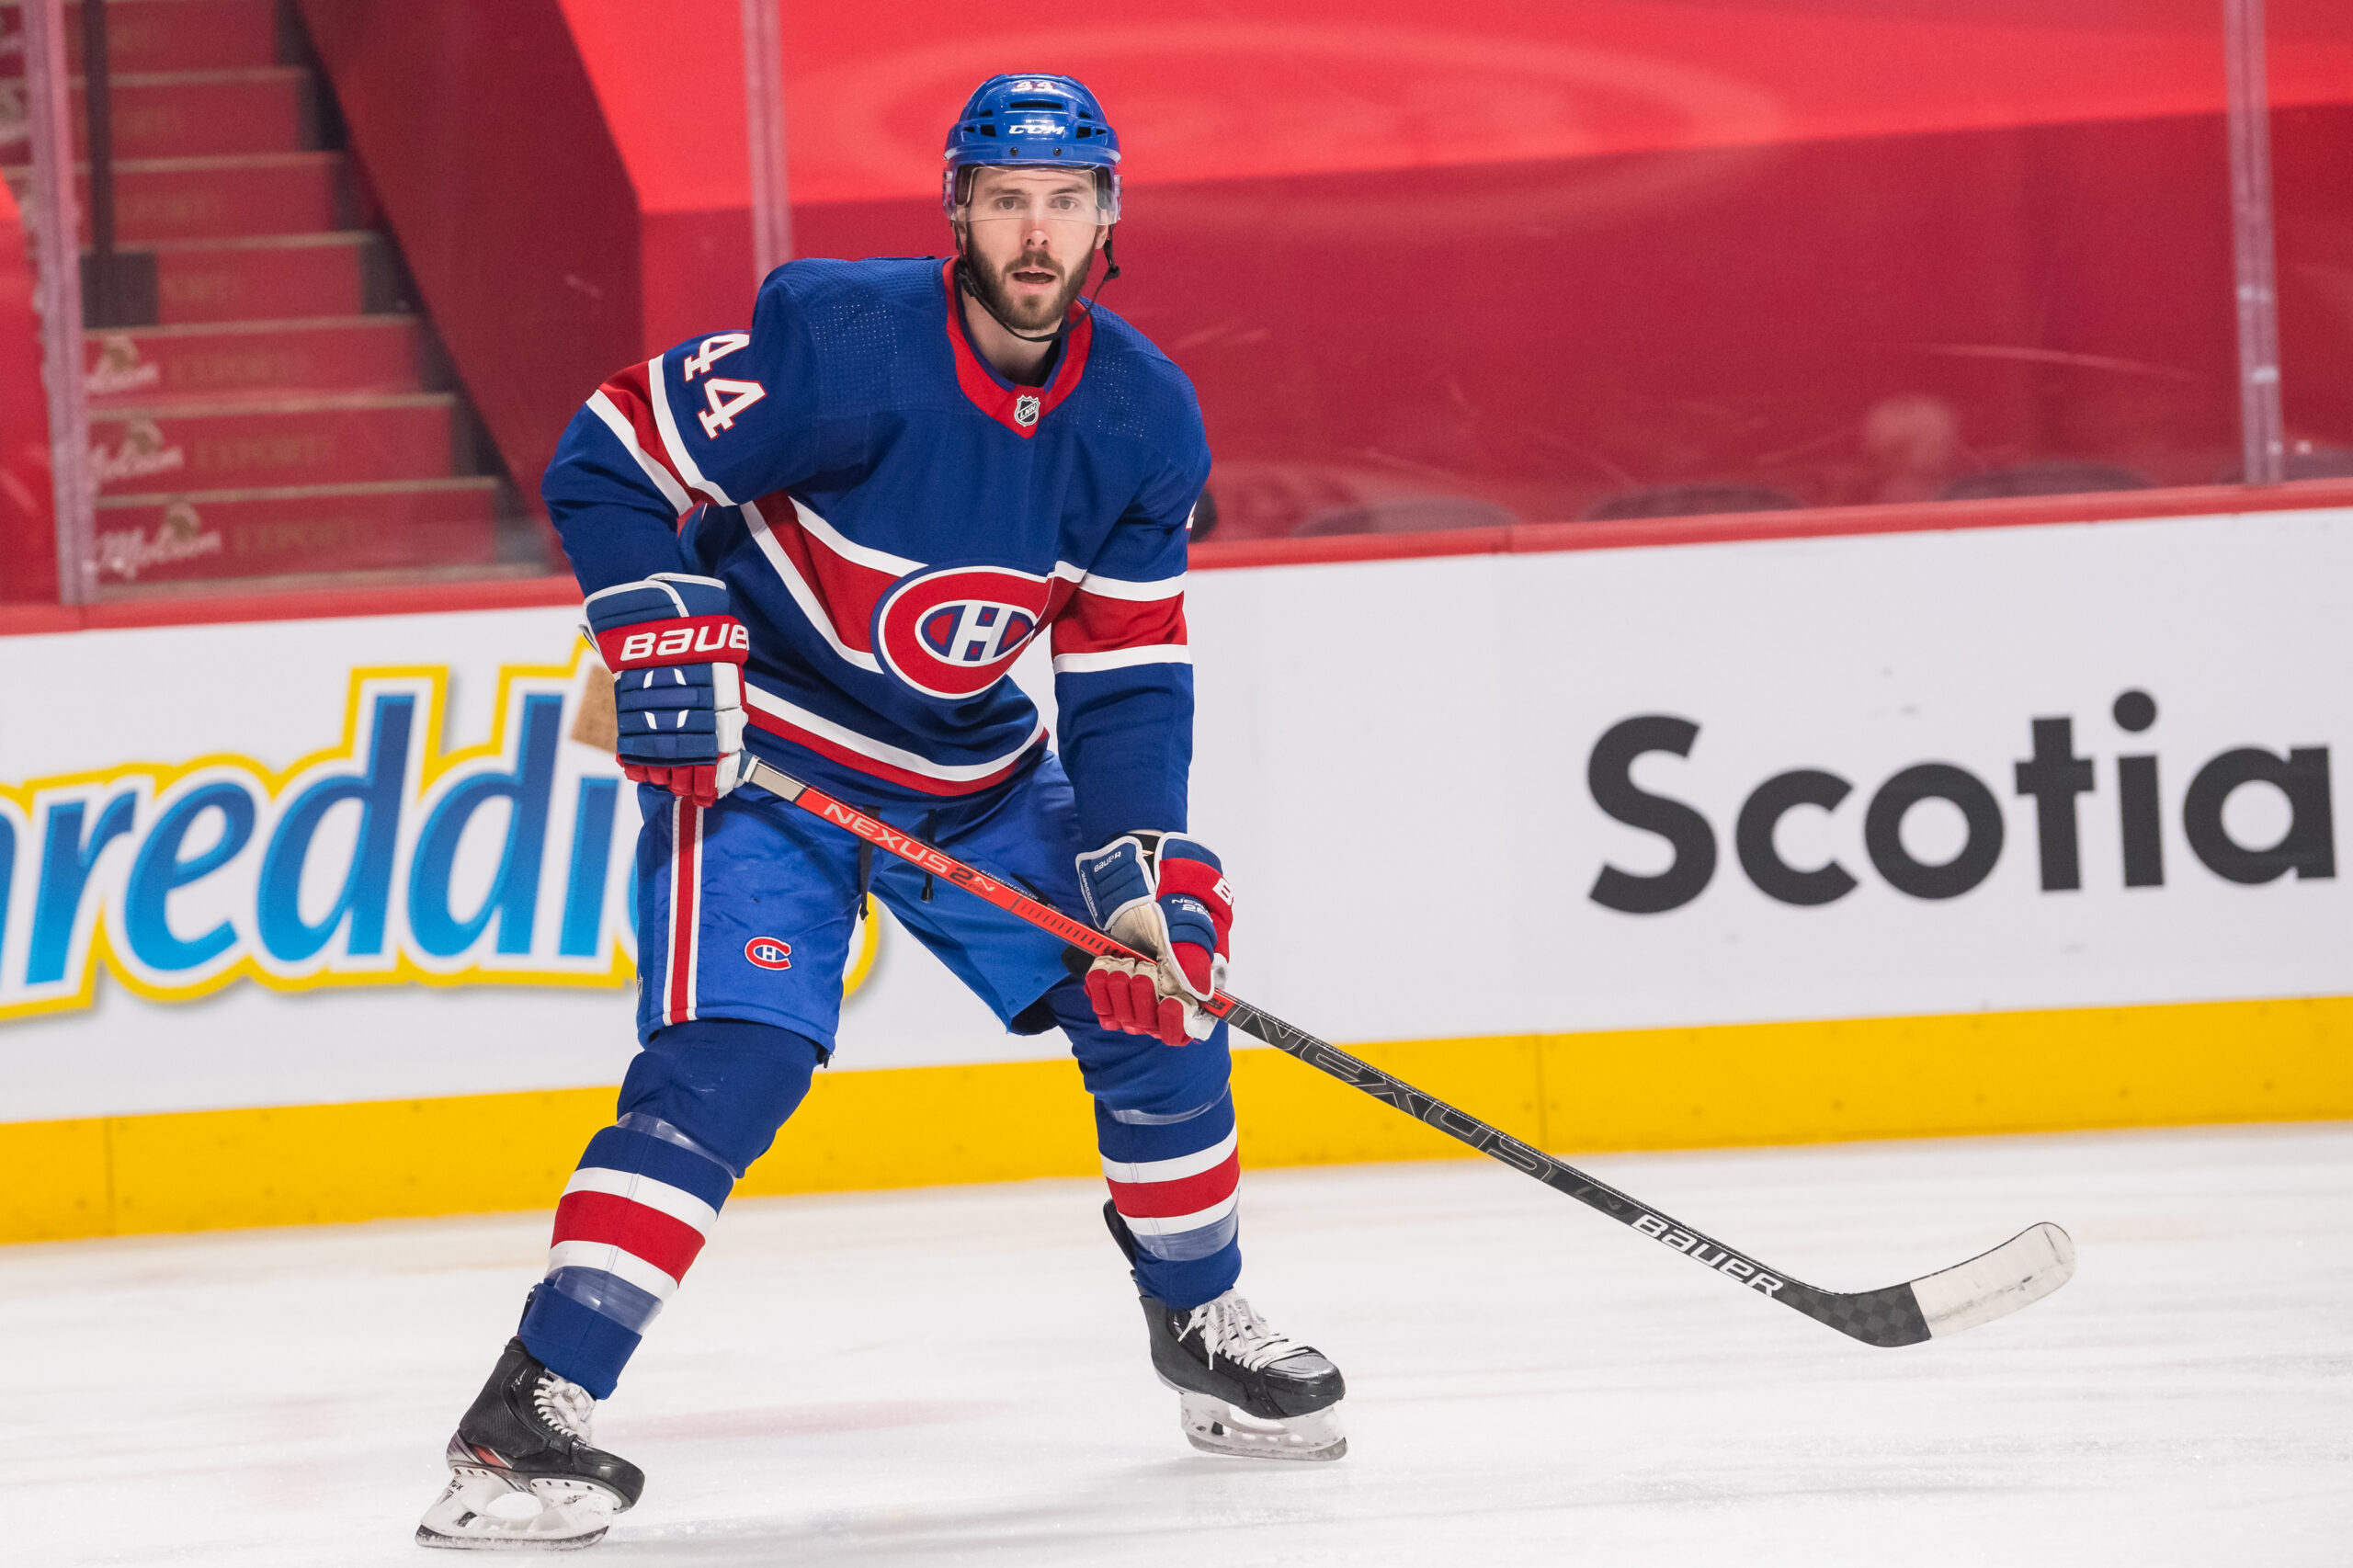 Canadiens’ Defensive Depth Gets Tested with Edmundson Injury